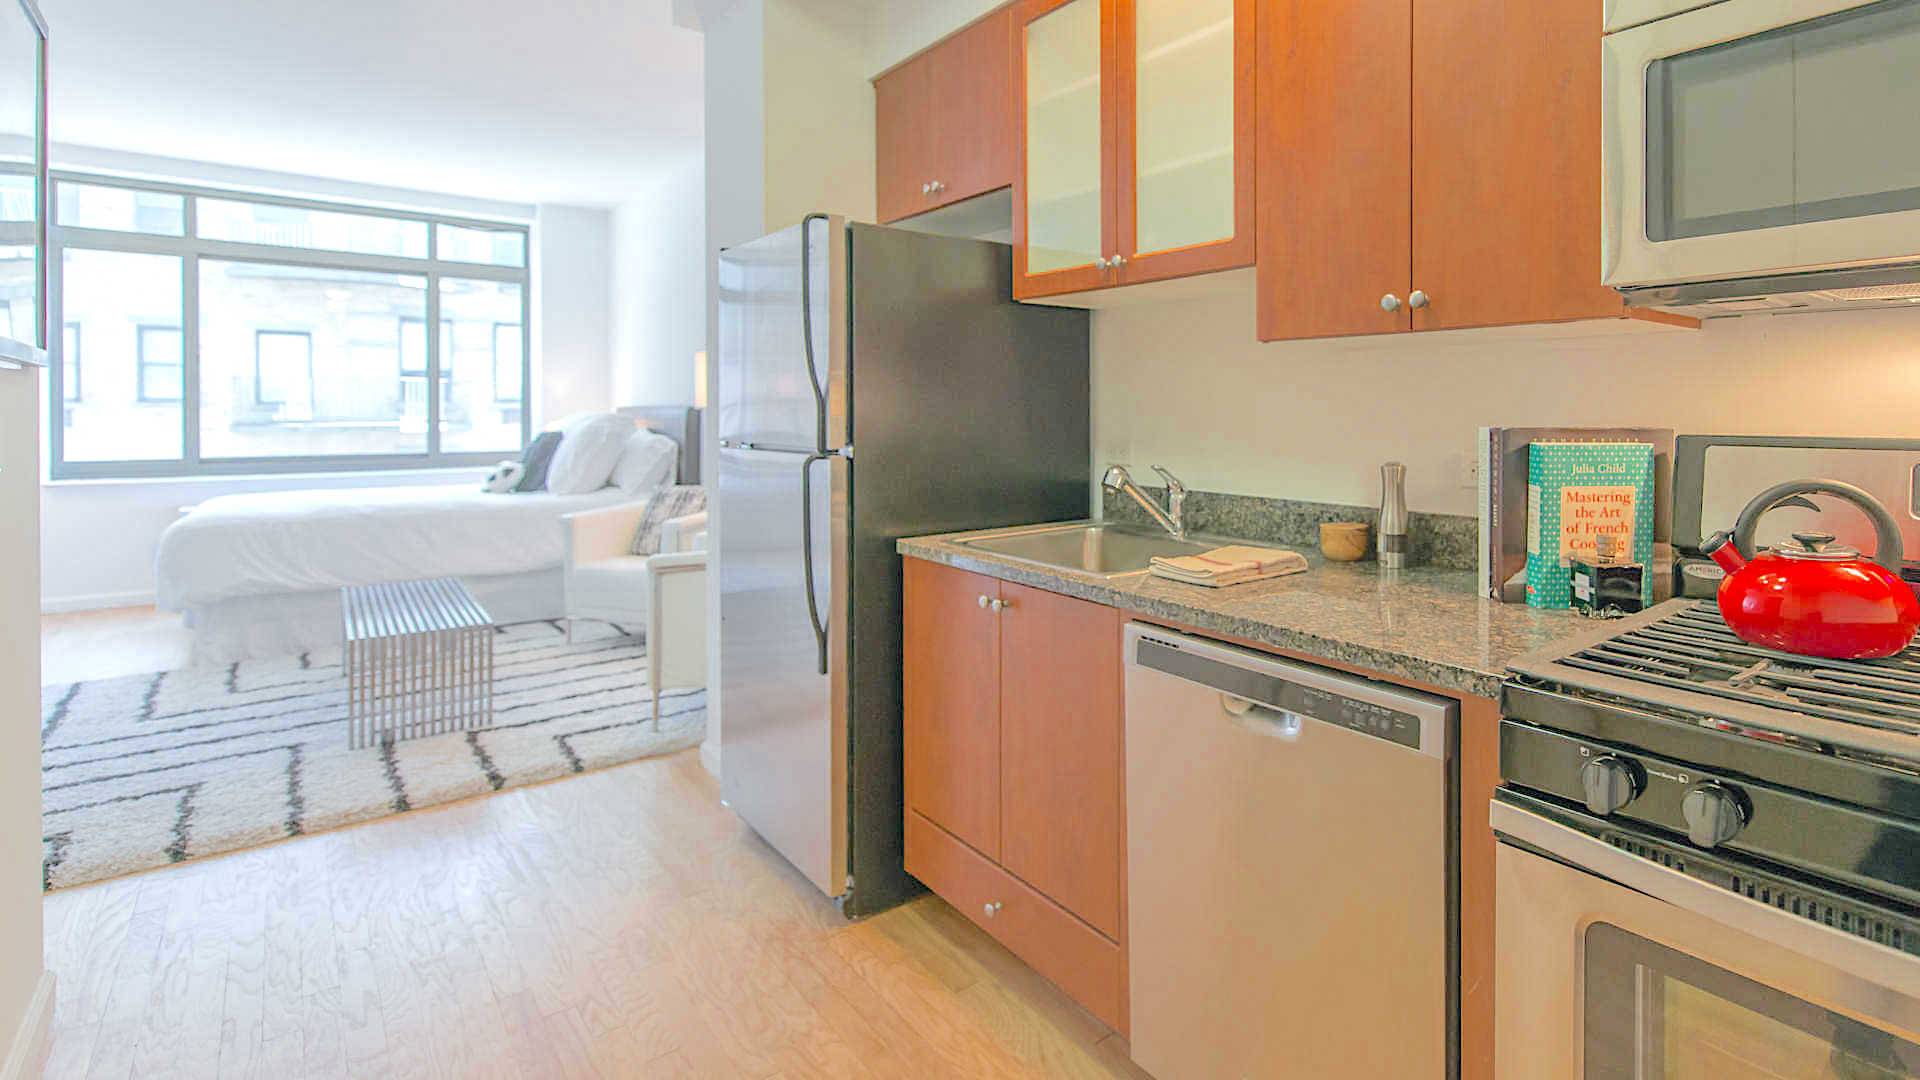 Wonderful West Village Alcove Studio Apartment with 1 Bath featuring a Gym and Garage